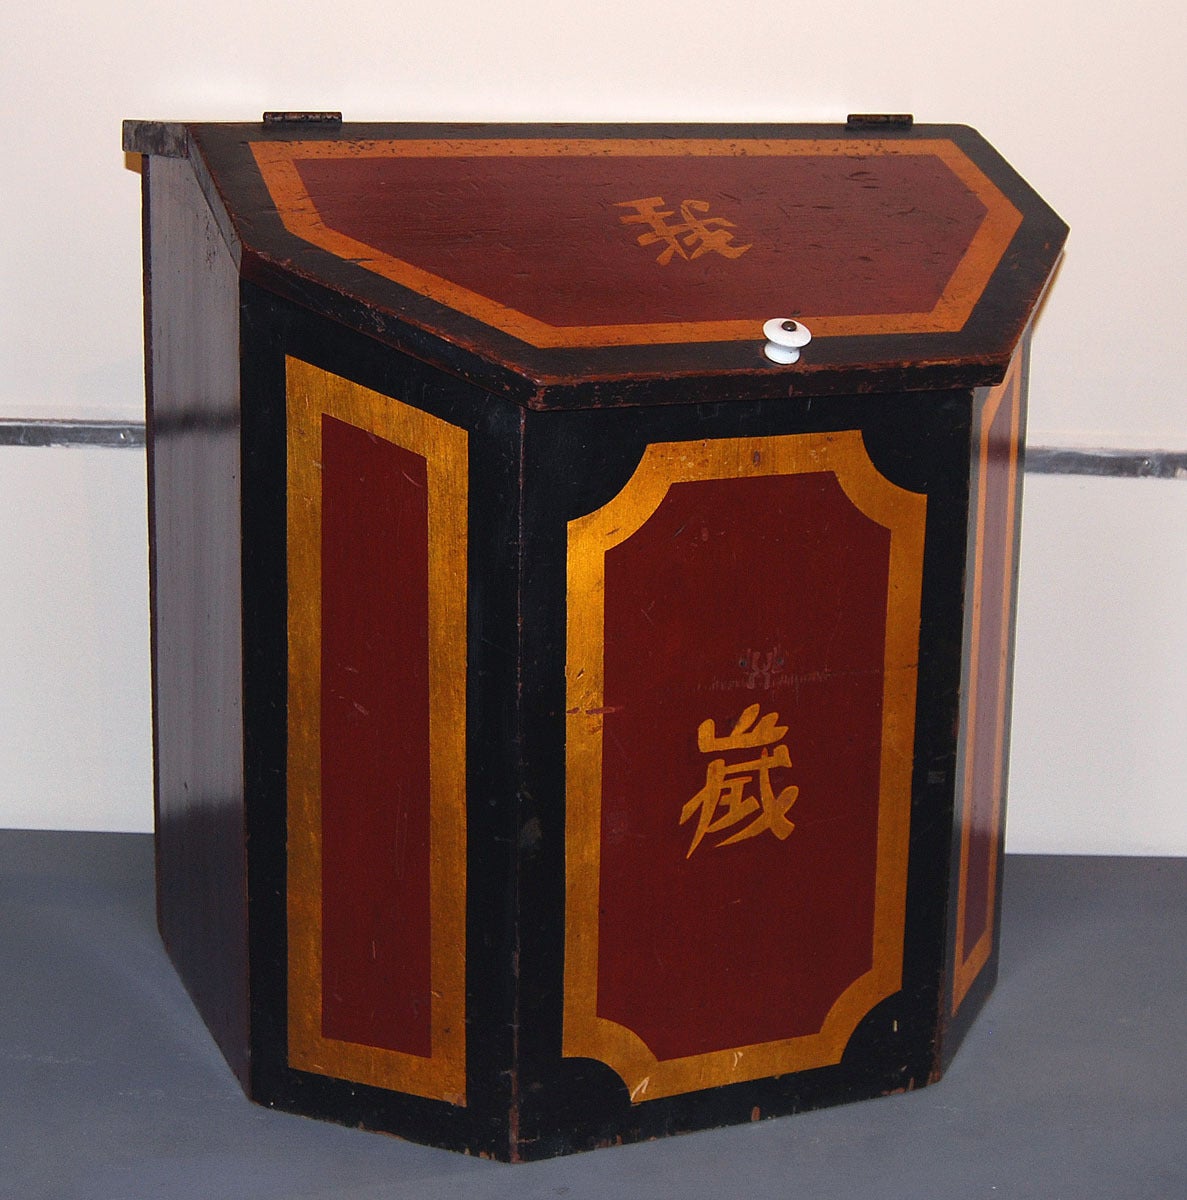 Pair of stunning, large painted Chinese bins for tea, in original red, black and gold paint; each with two silver paper-lined compartments. These would have been made for a shop and were used in New England. Excellent condition, original white